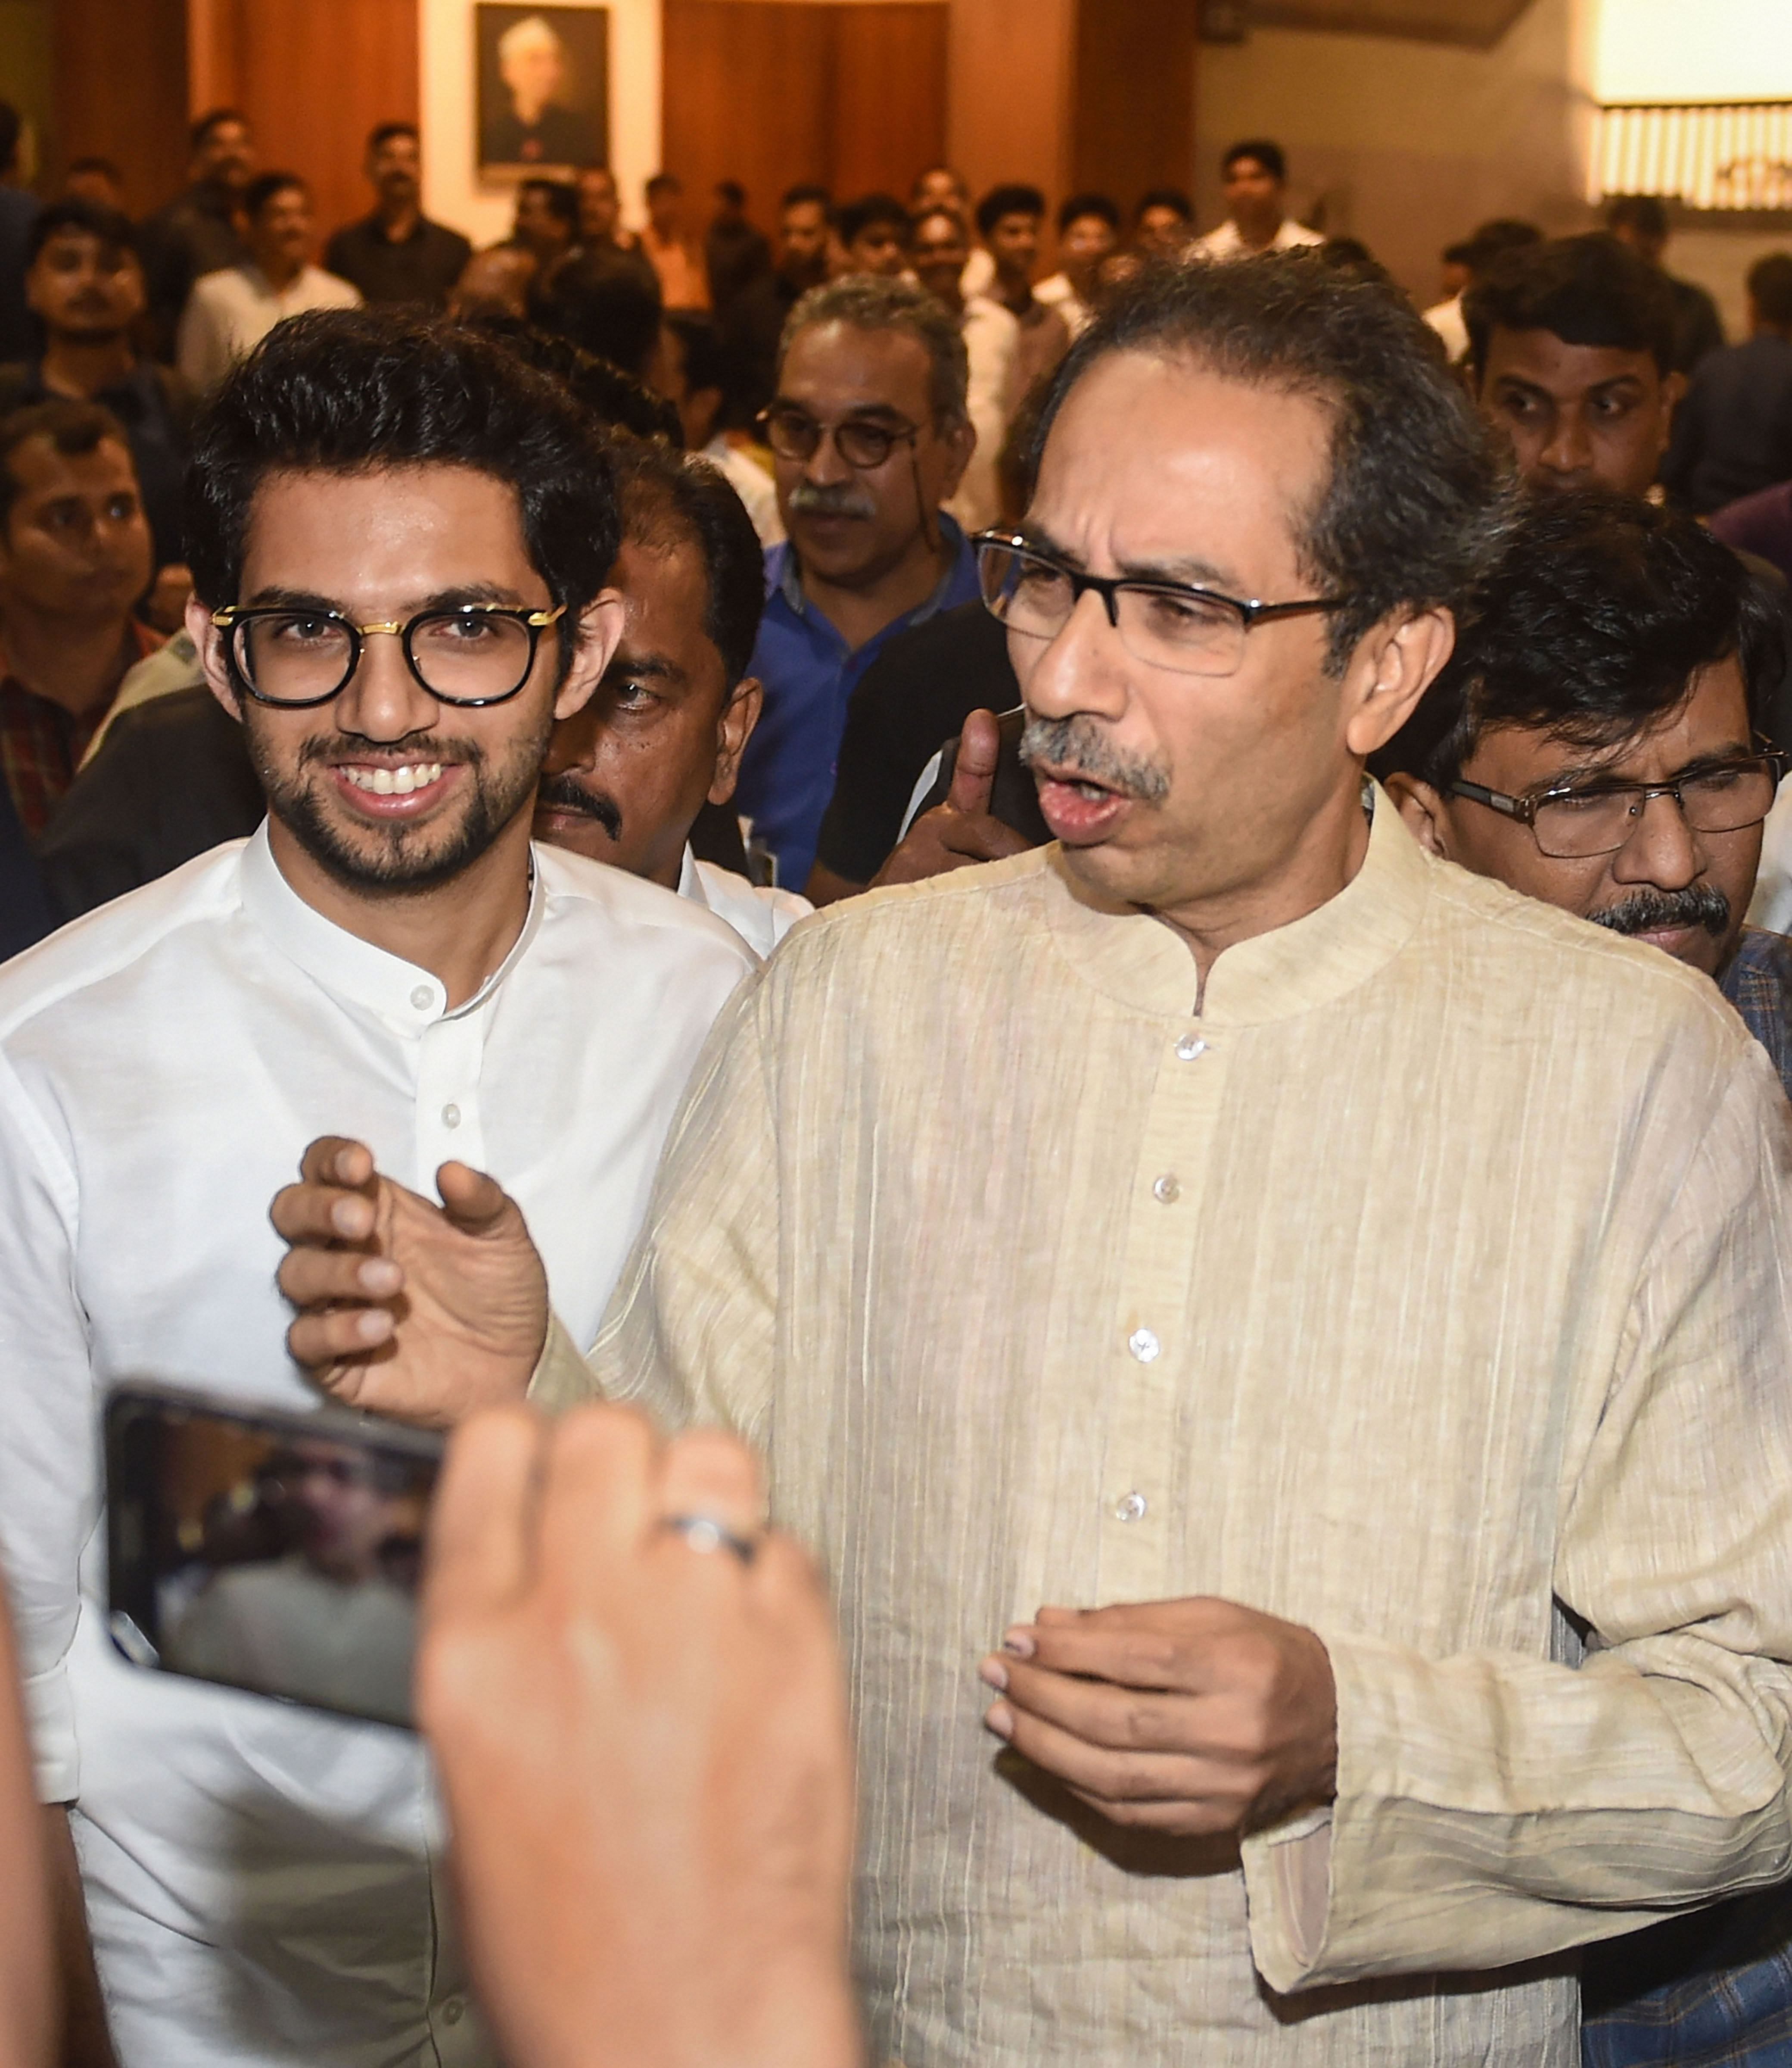 Shiv Sena chief Uddhav Thackeray and son Aaditya Thackeray leave after a meeting with Congress and NCP leaders, at Nehru Centre in Mumbai. (PTI Photo)